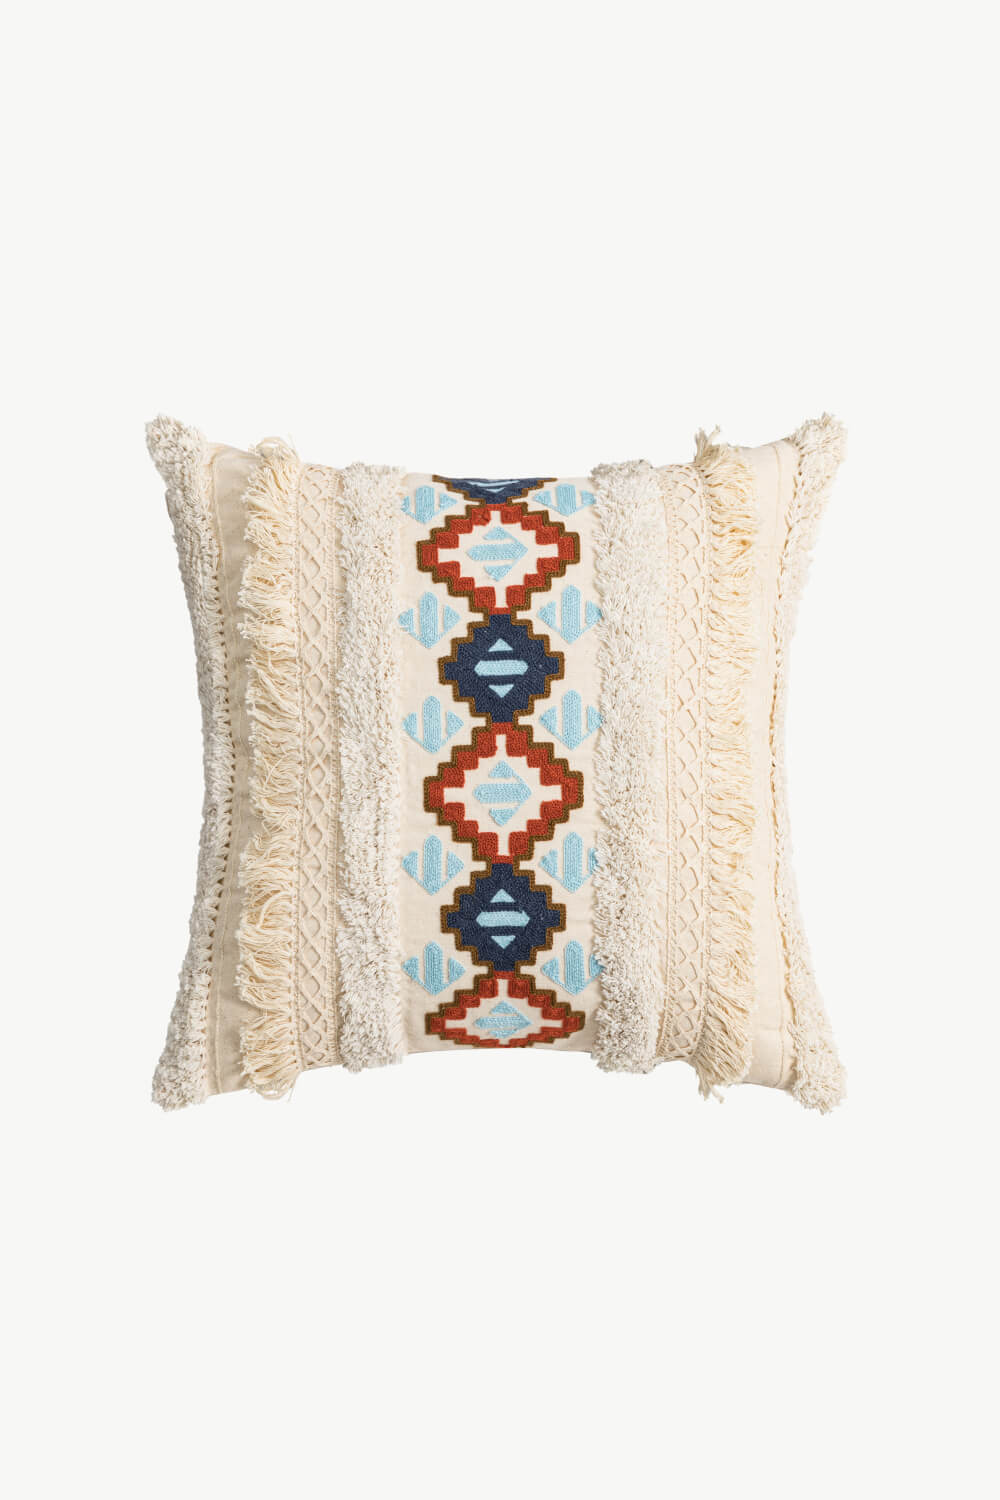 Embroidered square fringe detail pillow cover from Tidal Salt Co